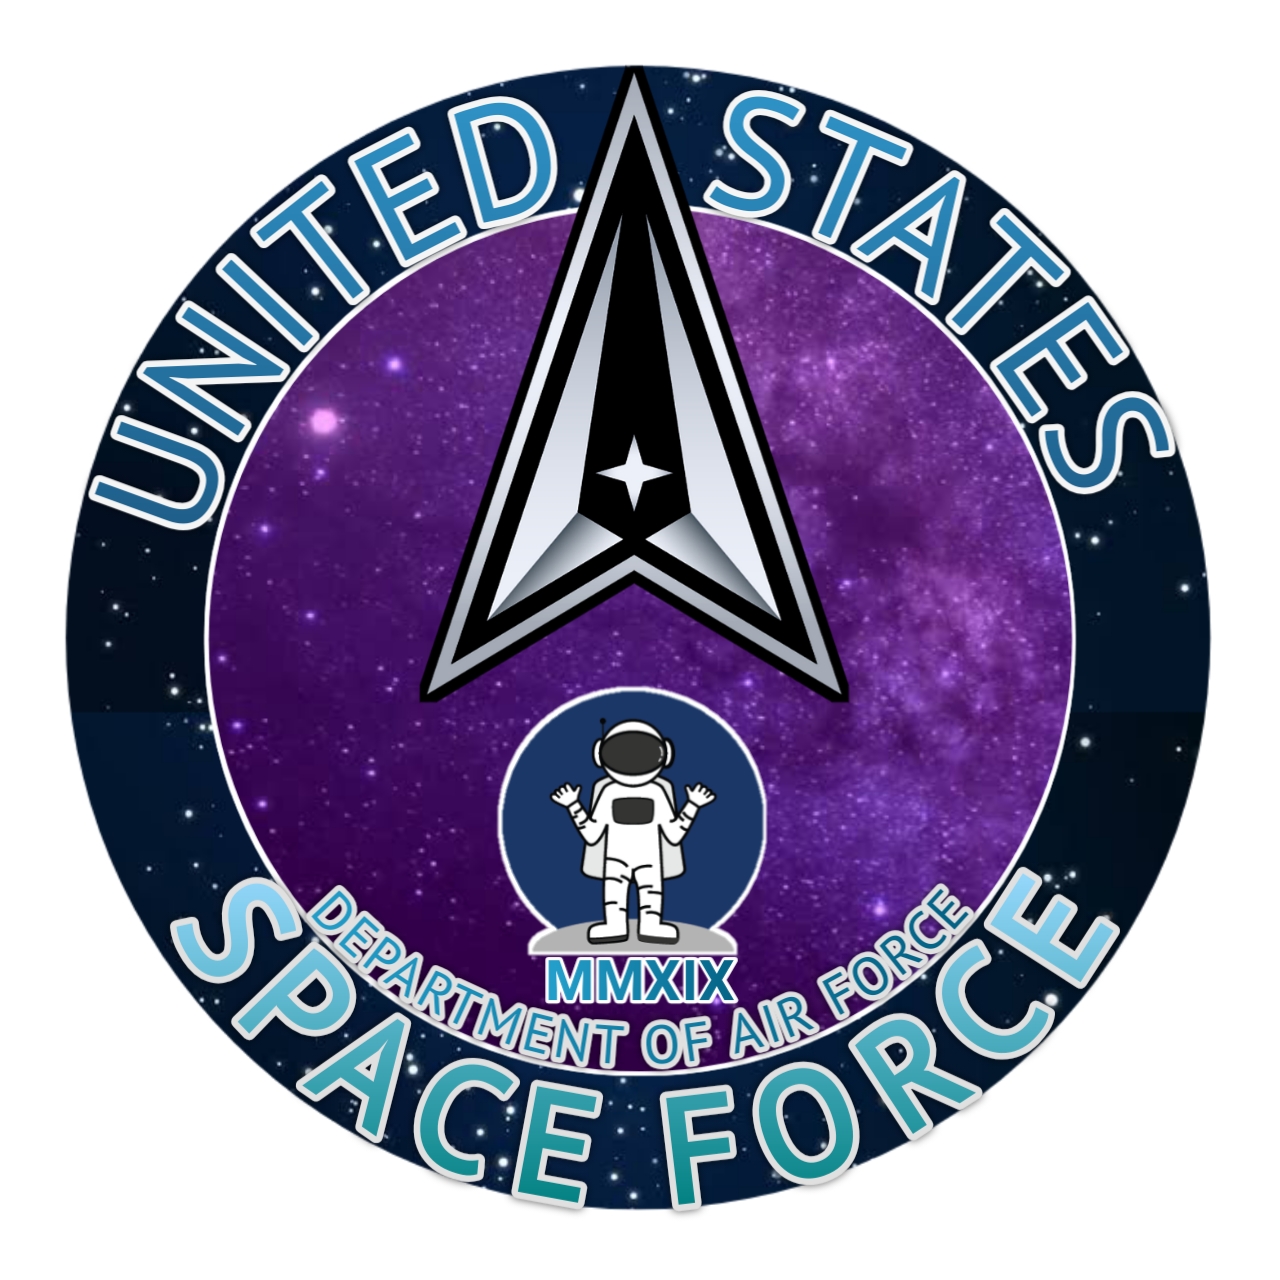 US space force logo